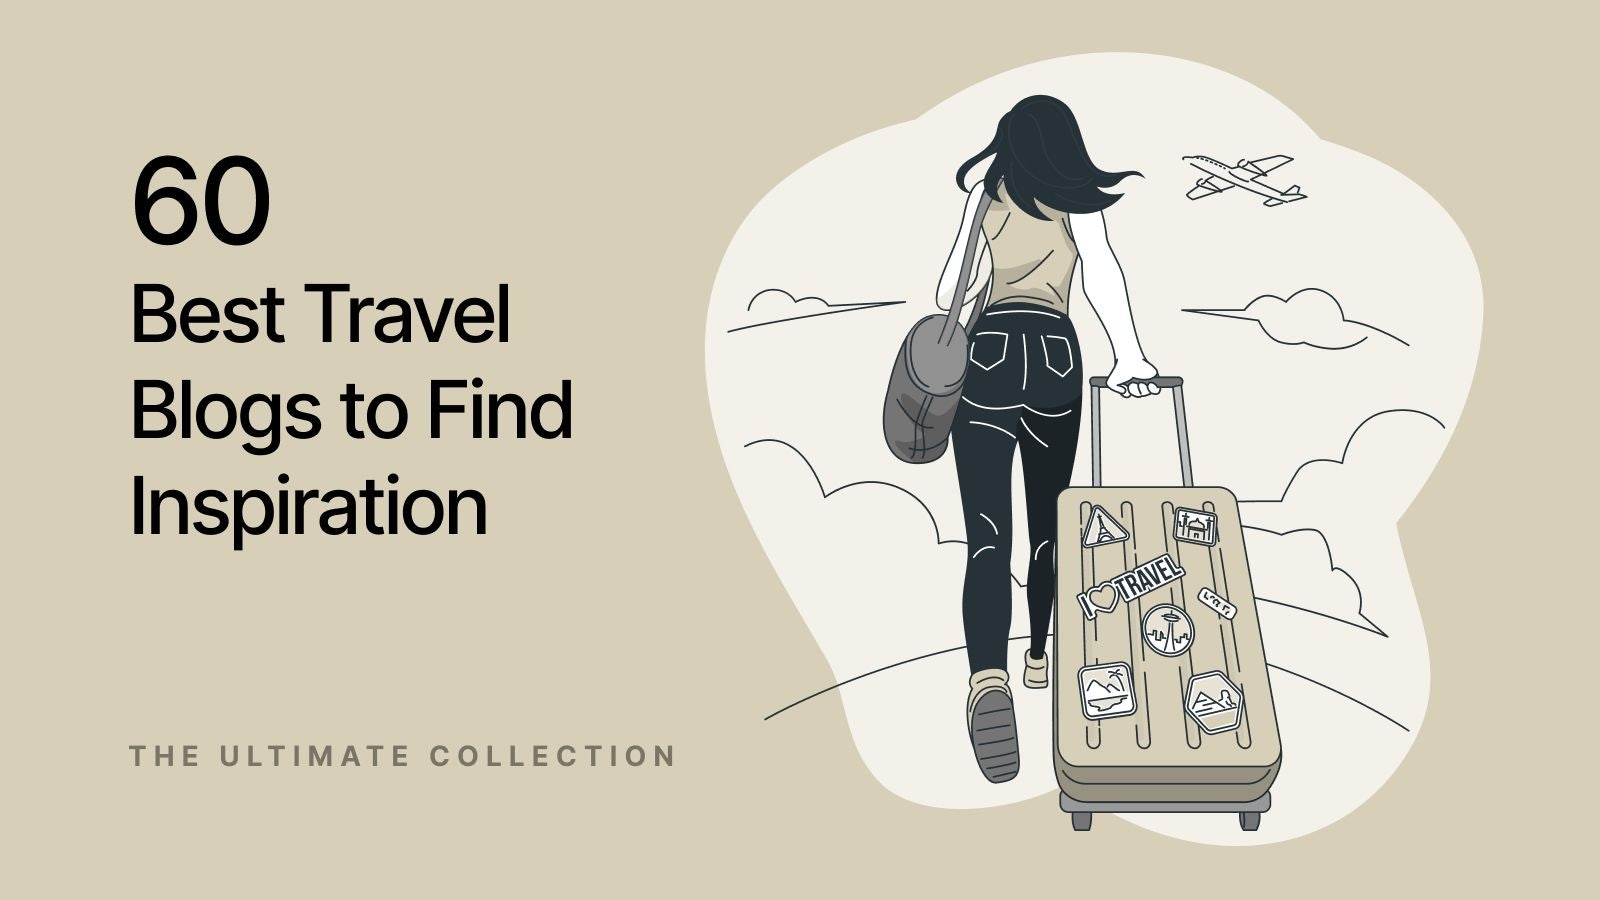 60 Best Travel Blogs to Find Inspiration